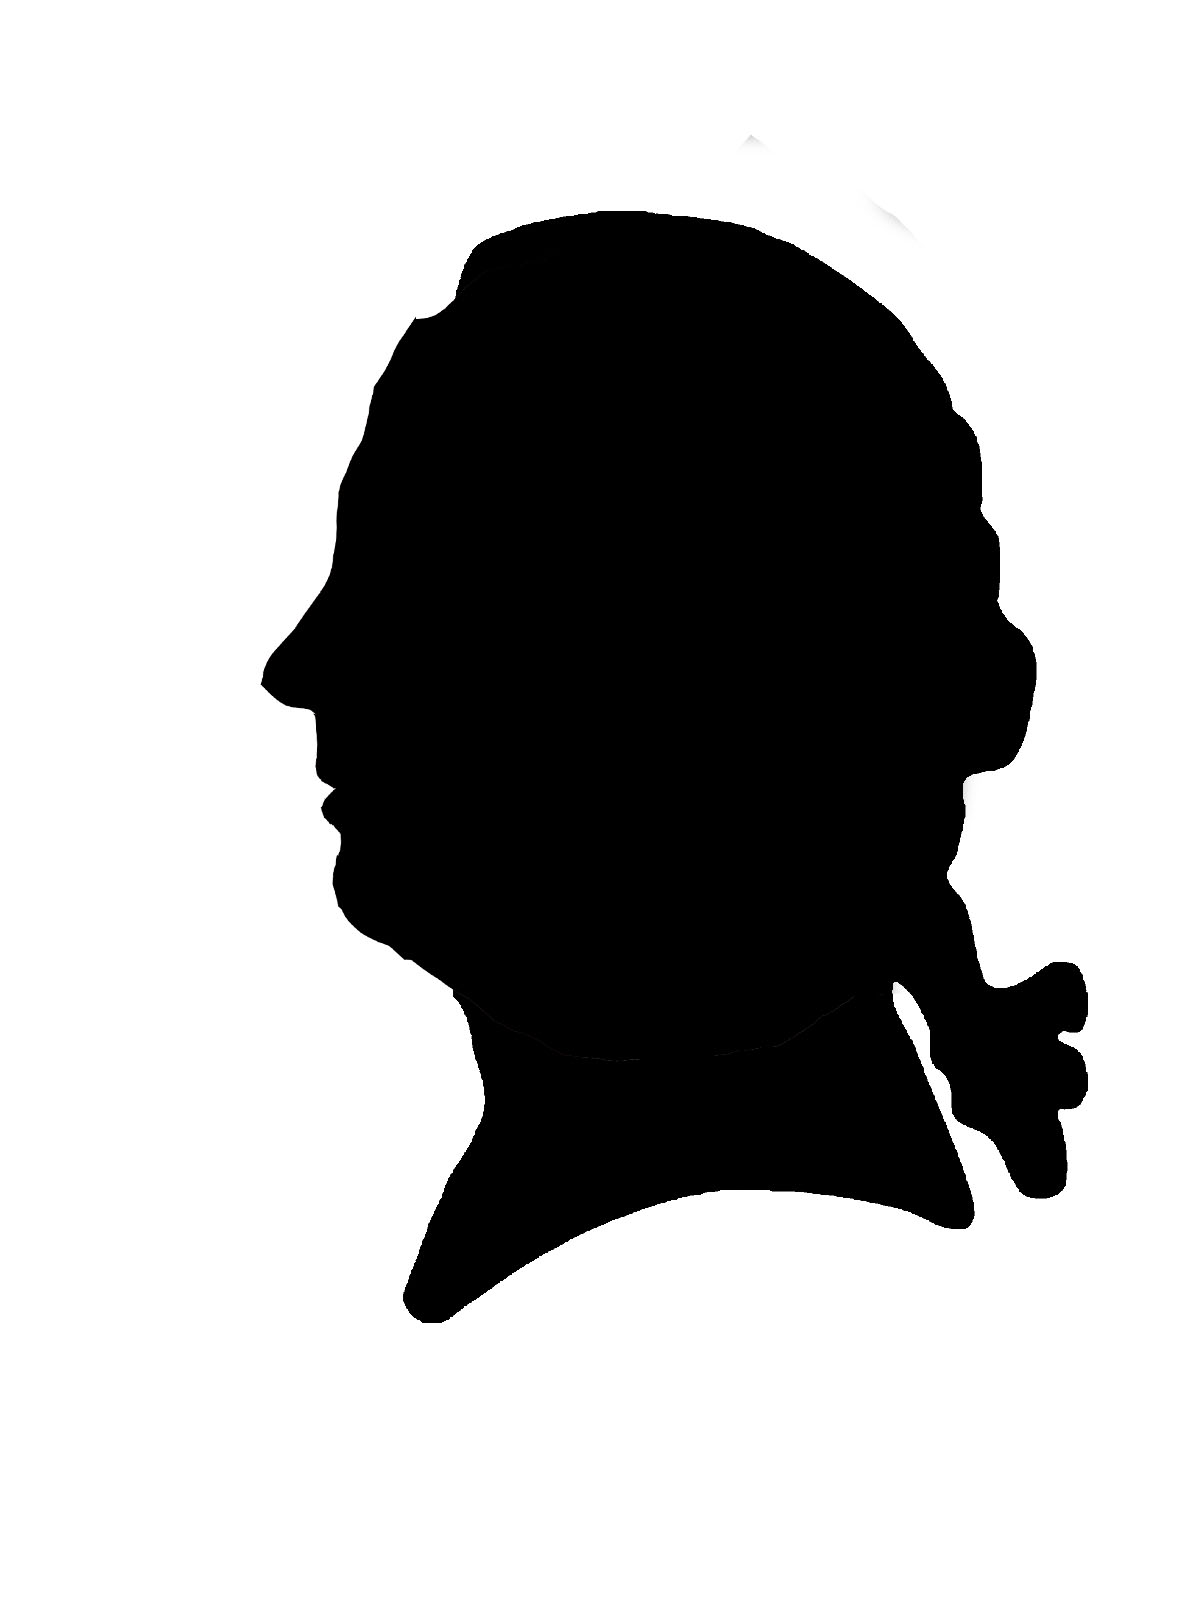 Colonial Silhouette Art - ClipArt Best